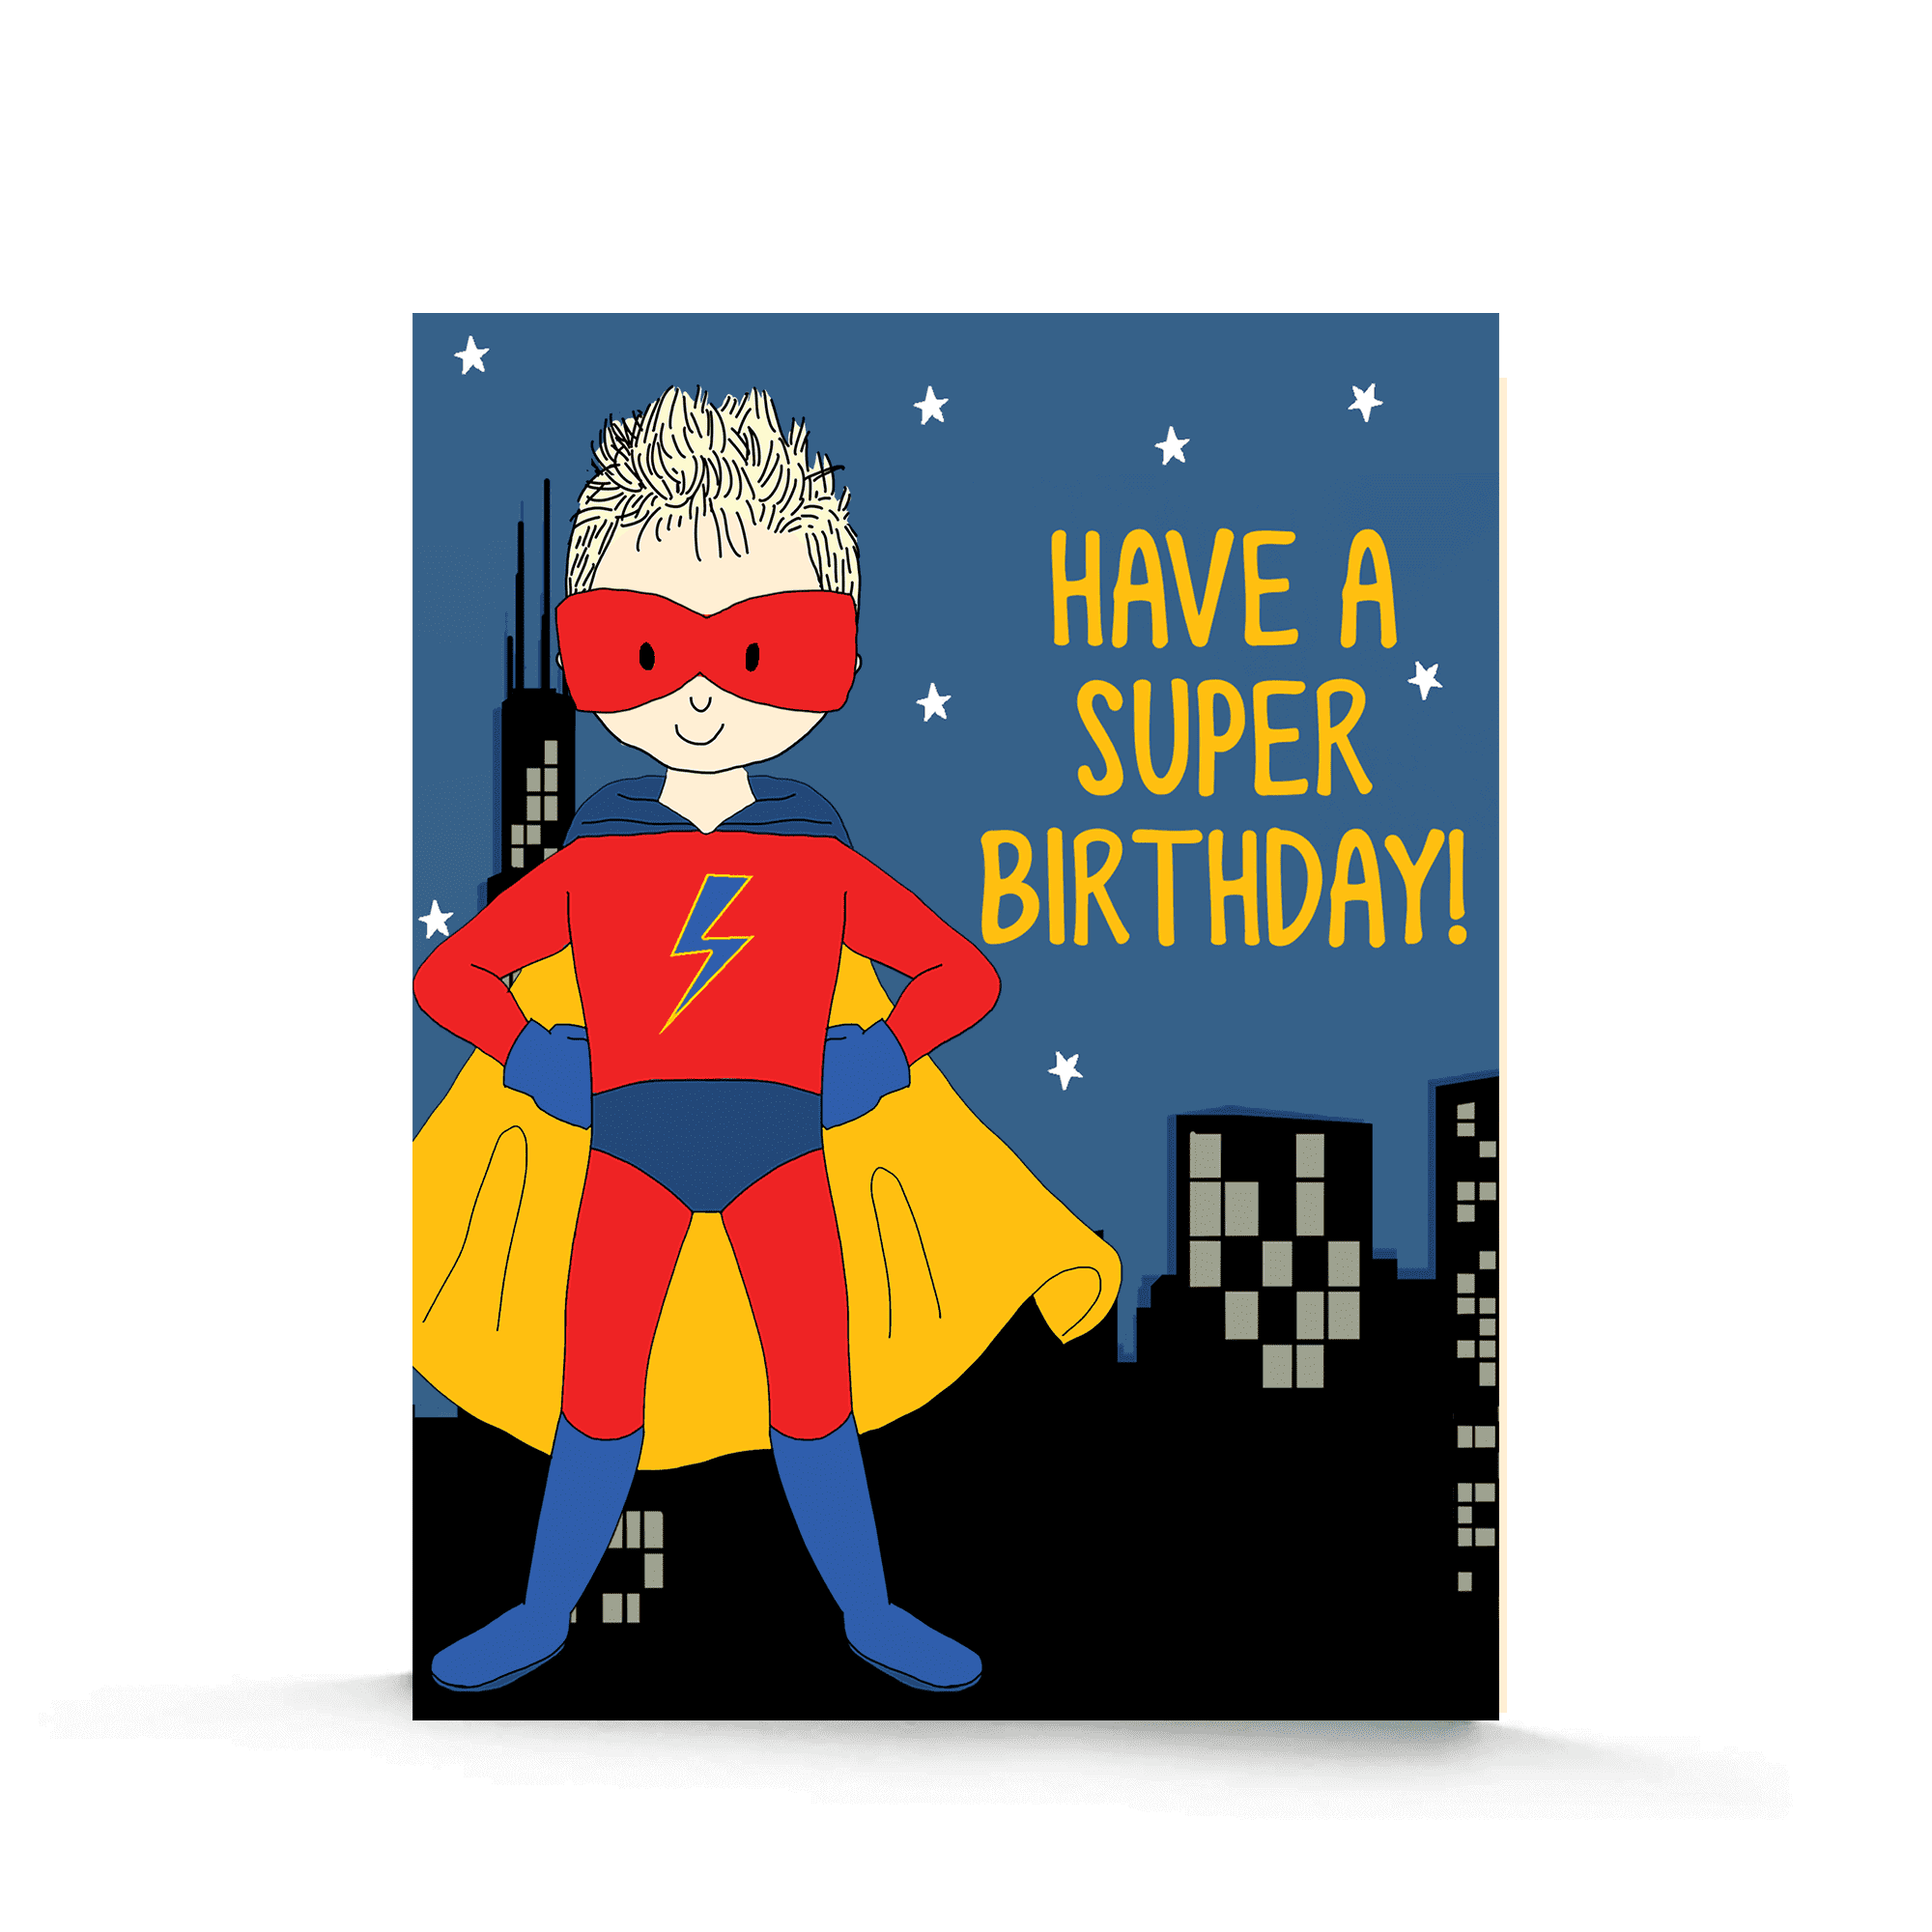 This Super Boy Birthday Card | Birthday Cards for Boys | Superhero Birthday Card | Superhero Birthday | Boy with a Cape is made with love by Stacey M Design! Shop more unique gift ideas today with Spots Initiatives, the best way to support creators.